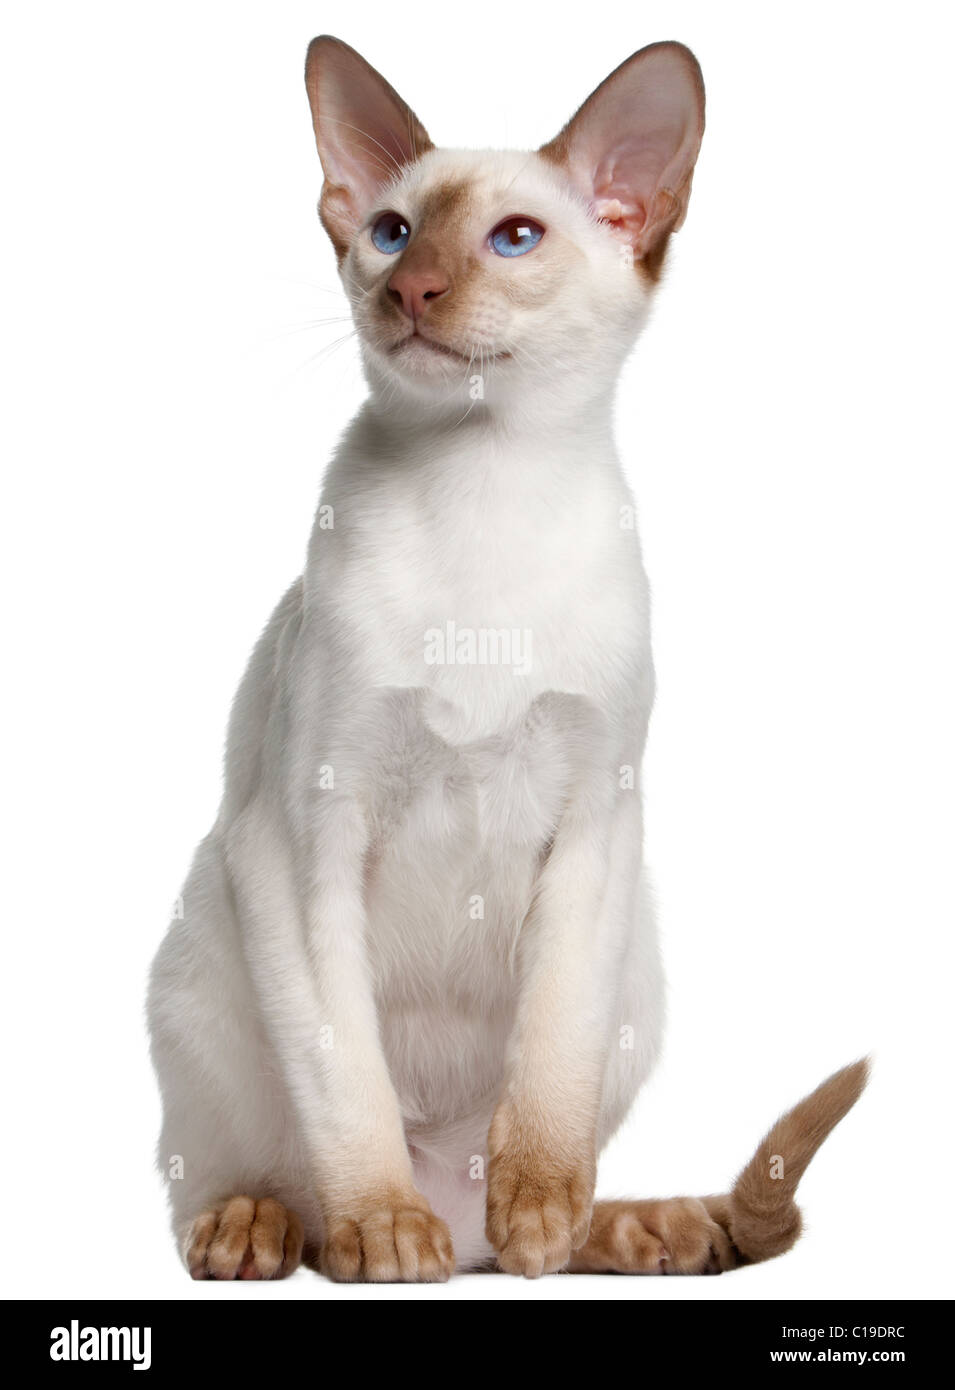 Siamese kitten, 5 months old, in front of white background Stock Photo